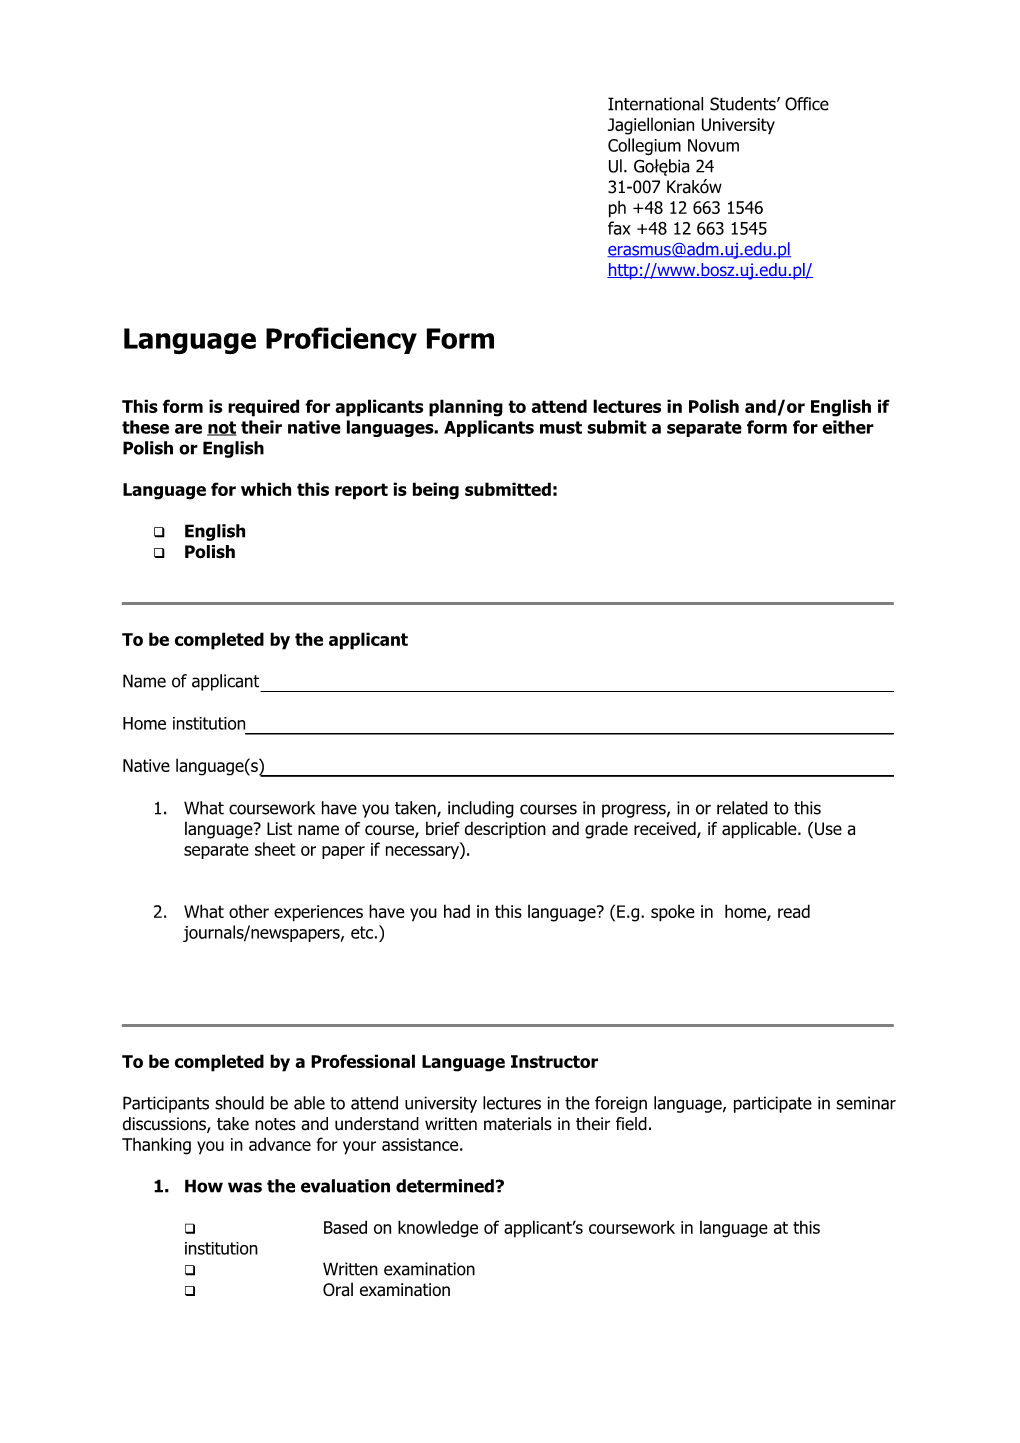 Language for Which This Report Is Being Submitted